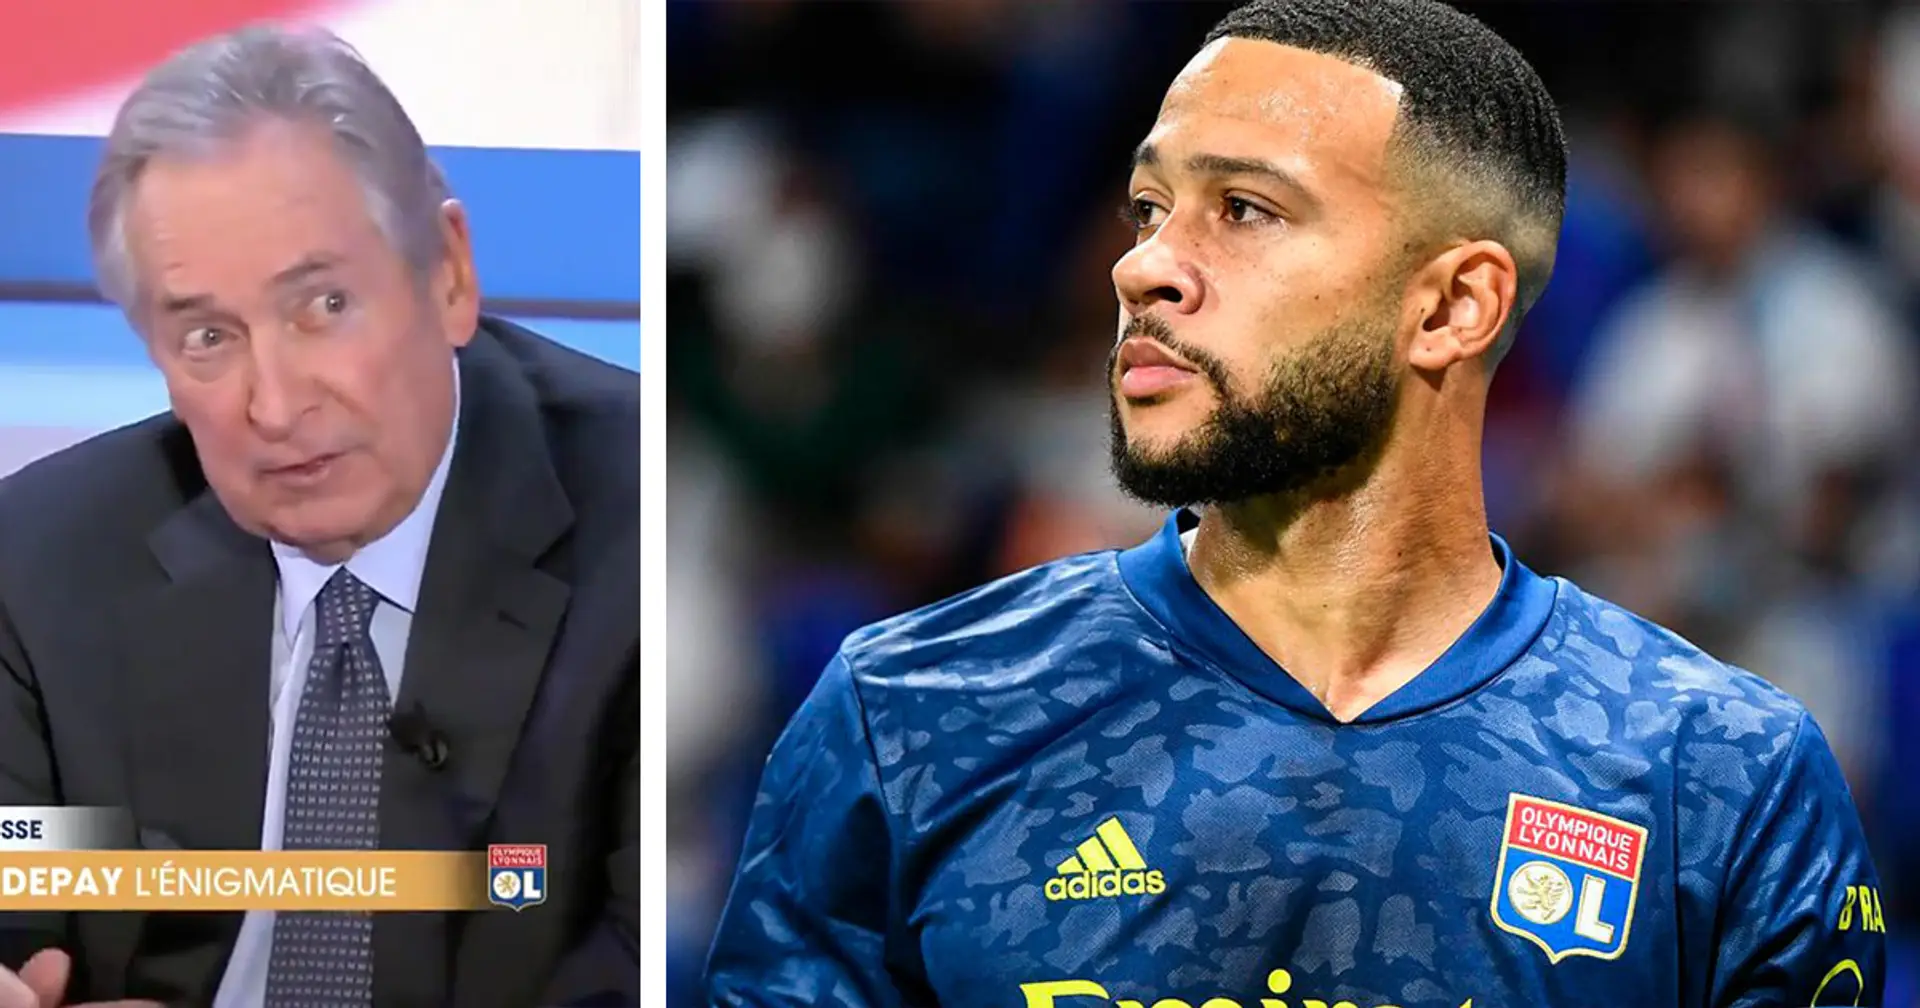 'He's very happy at Lyon but Koeman appreciates him too much': Ex-Lyon manager brings Depay one step closer to Barca